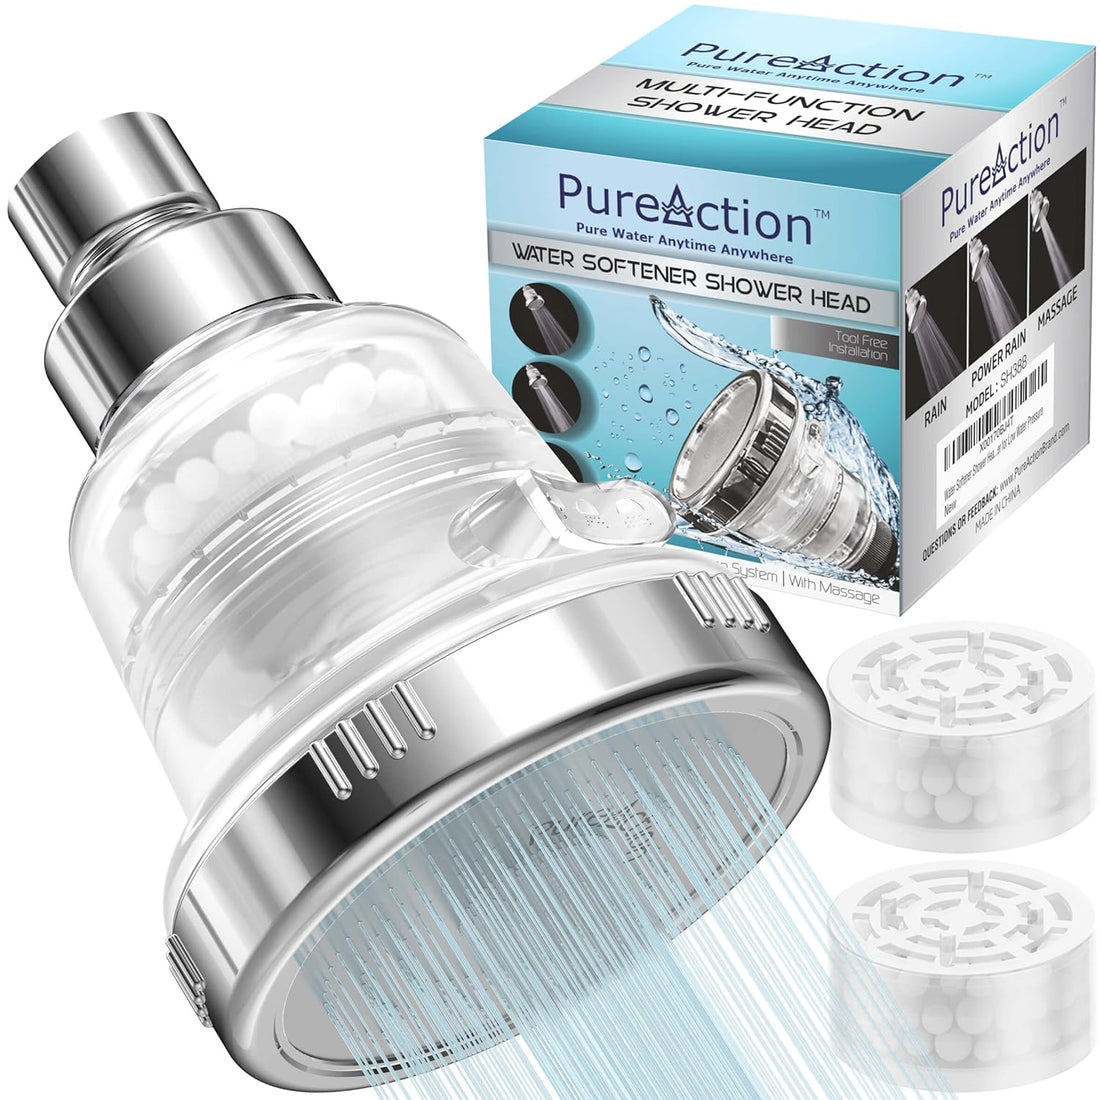 PureAction Wall Mounted Filtered Shower Head with 3 High Pressure Flow/Spray Setting and 10000 Gallon Filter - Filters Chlorine, Removes Hard Water, Prevents Hair & Skin Dryness